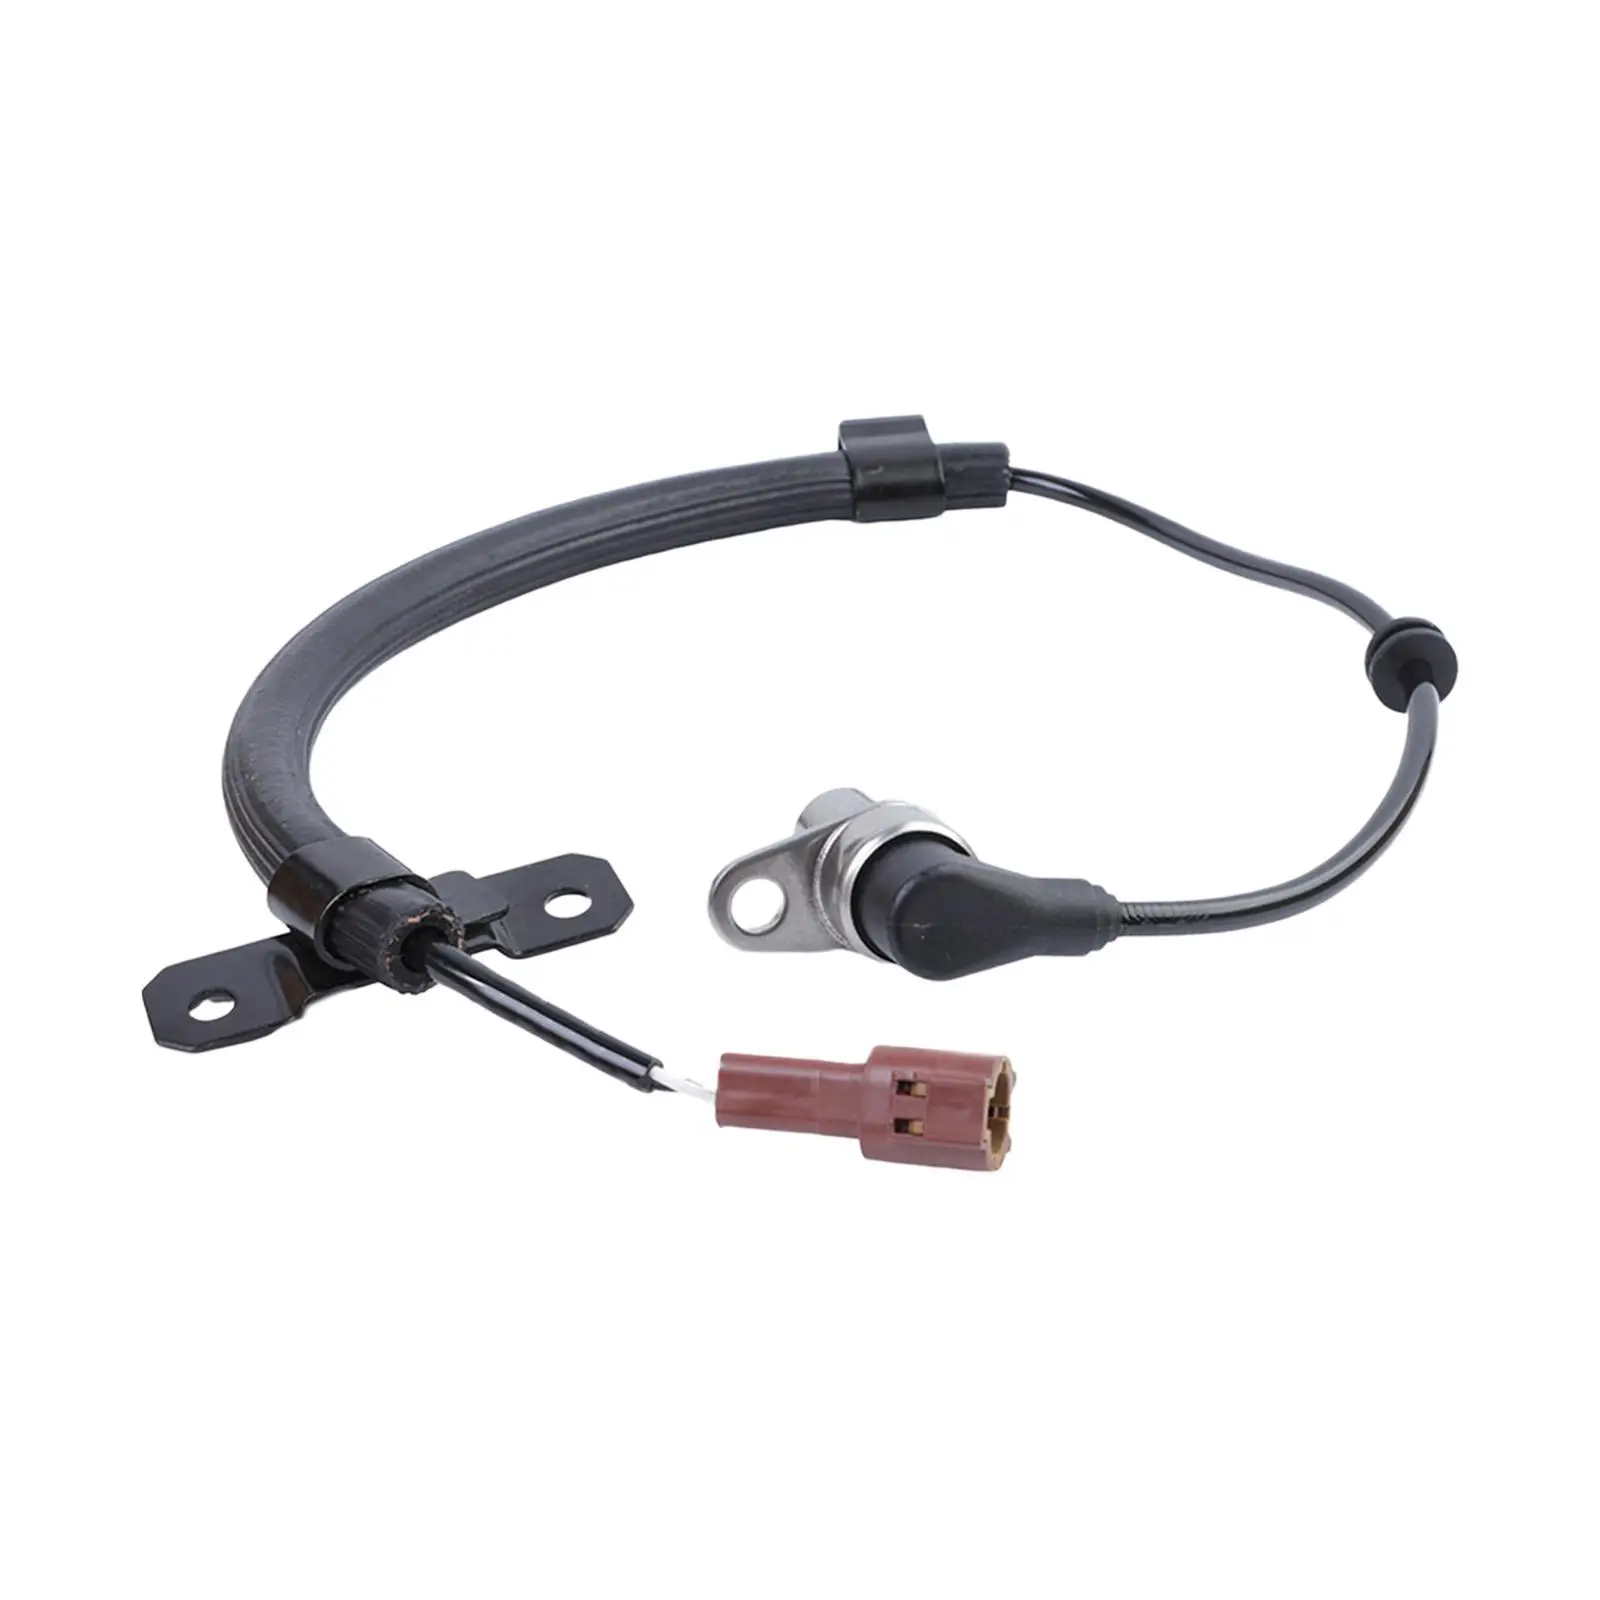 ABS Wheel Speed Sensor Durable for Pathfinder 1996-2000 Easily Install